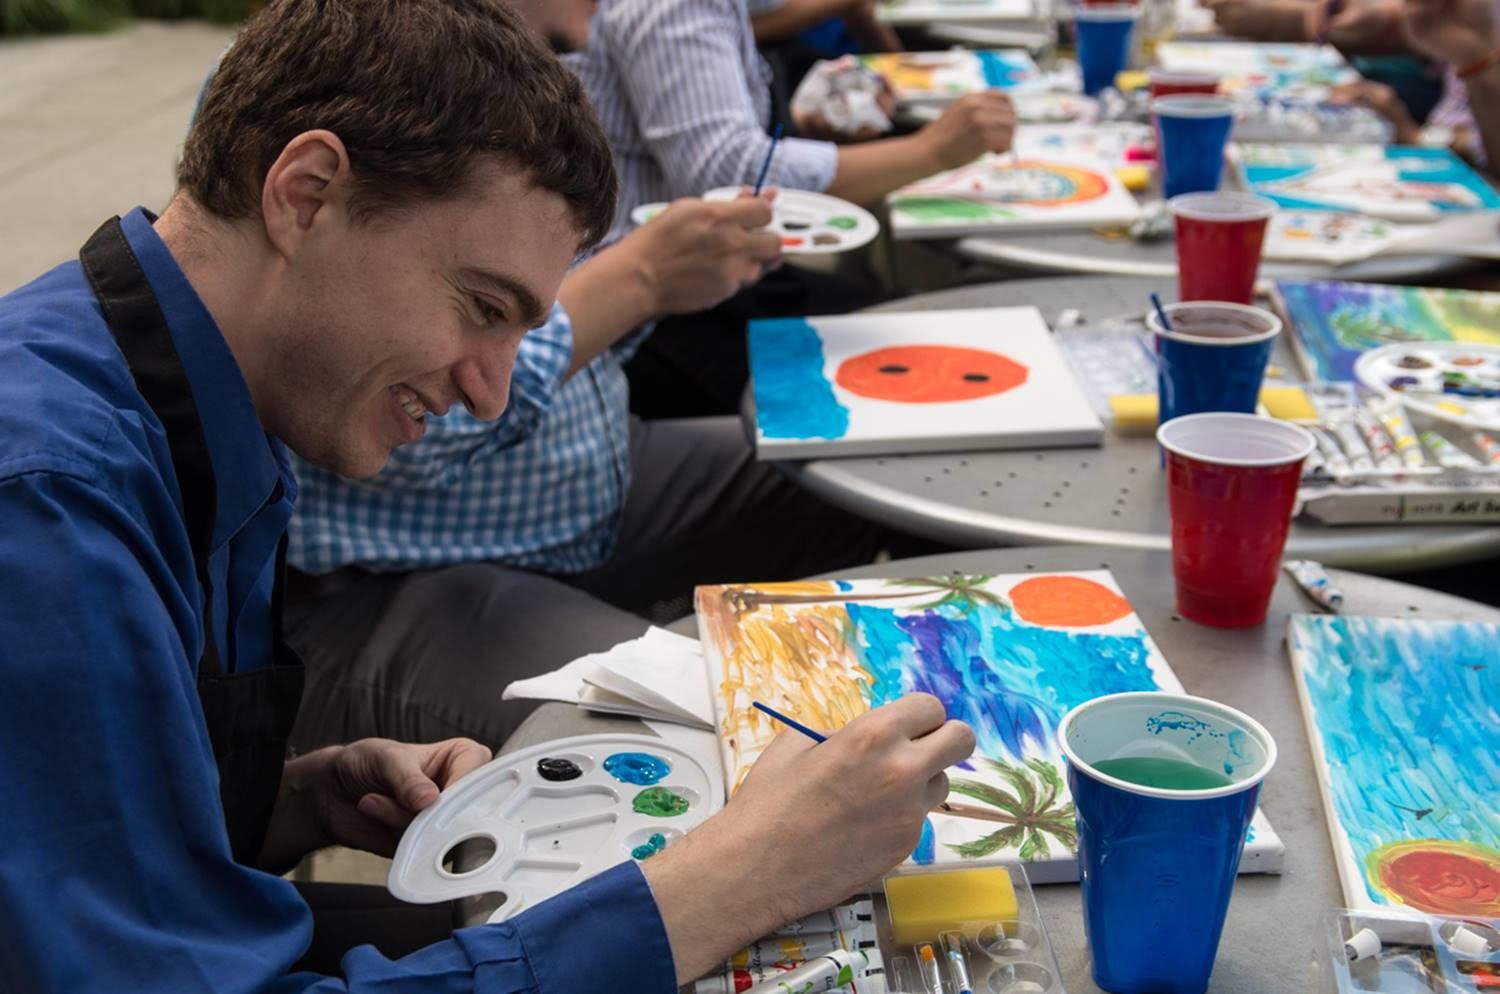 Fun Corporate Team Building event with acrylic painting